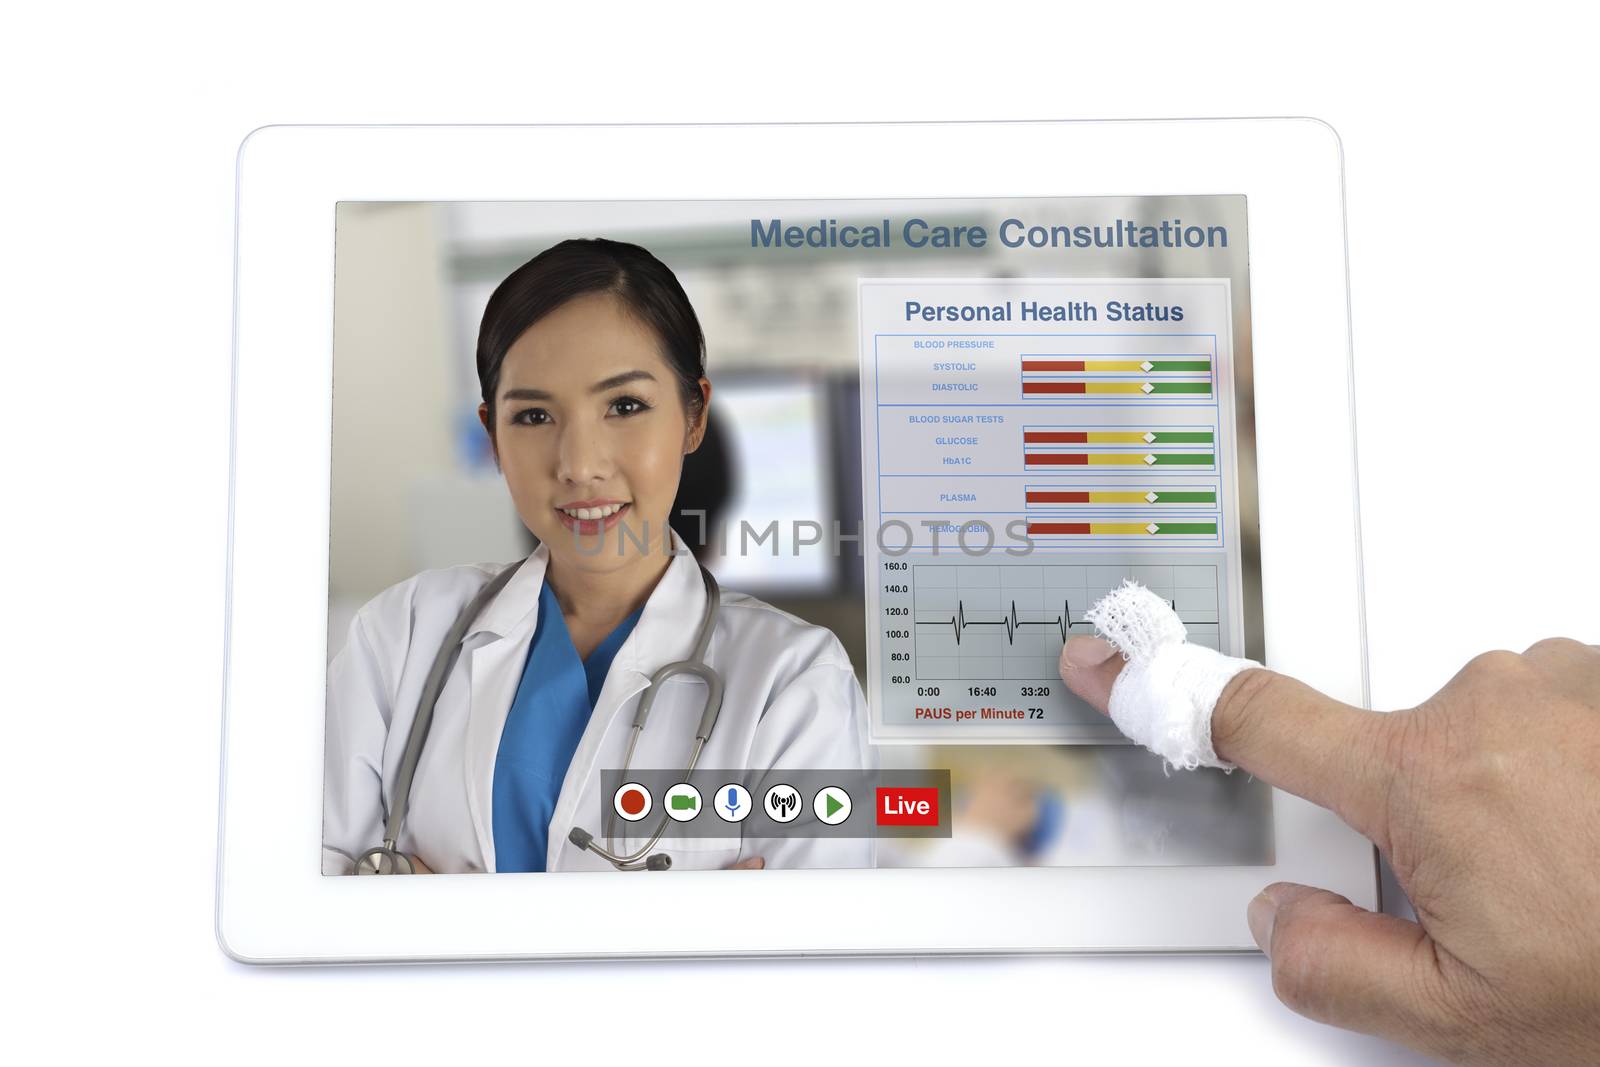 Patient get medical consultation from doctor by teleconference on digital tablet.